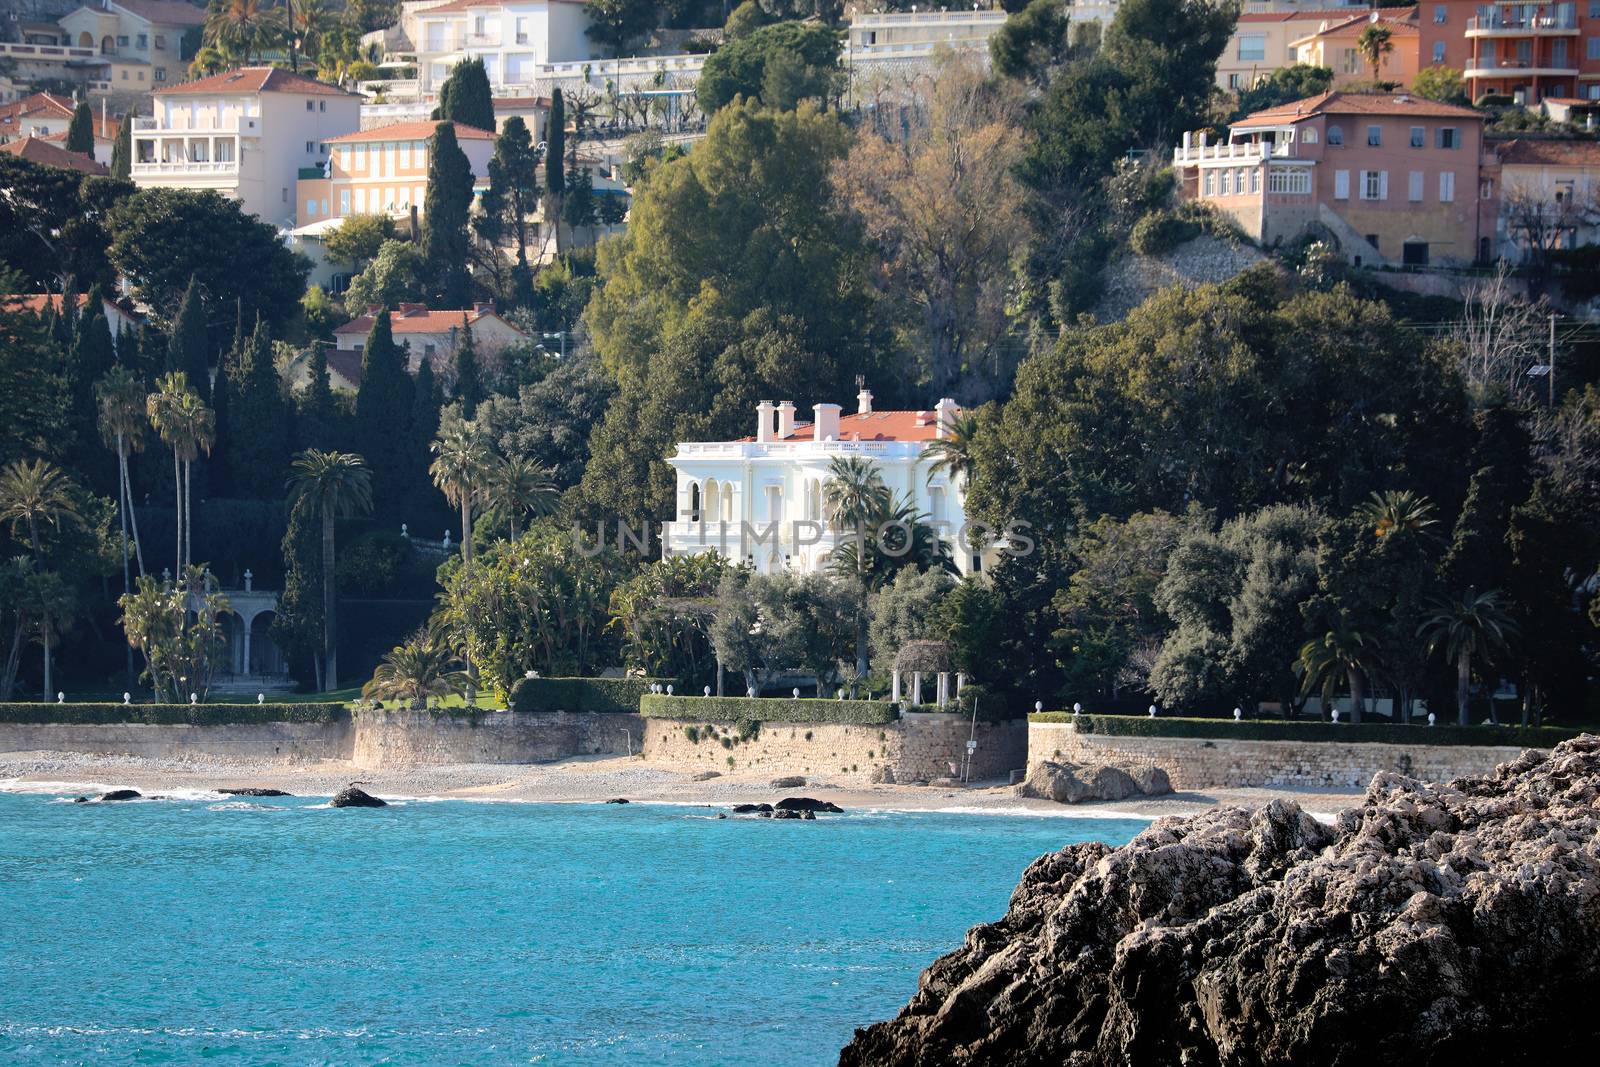 Luxurious Villa on The Beach in France, French Riviera